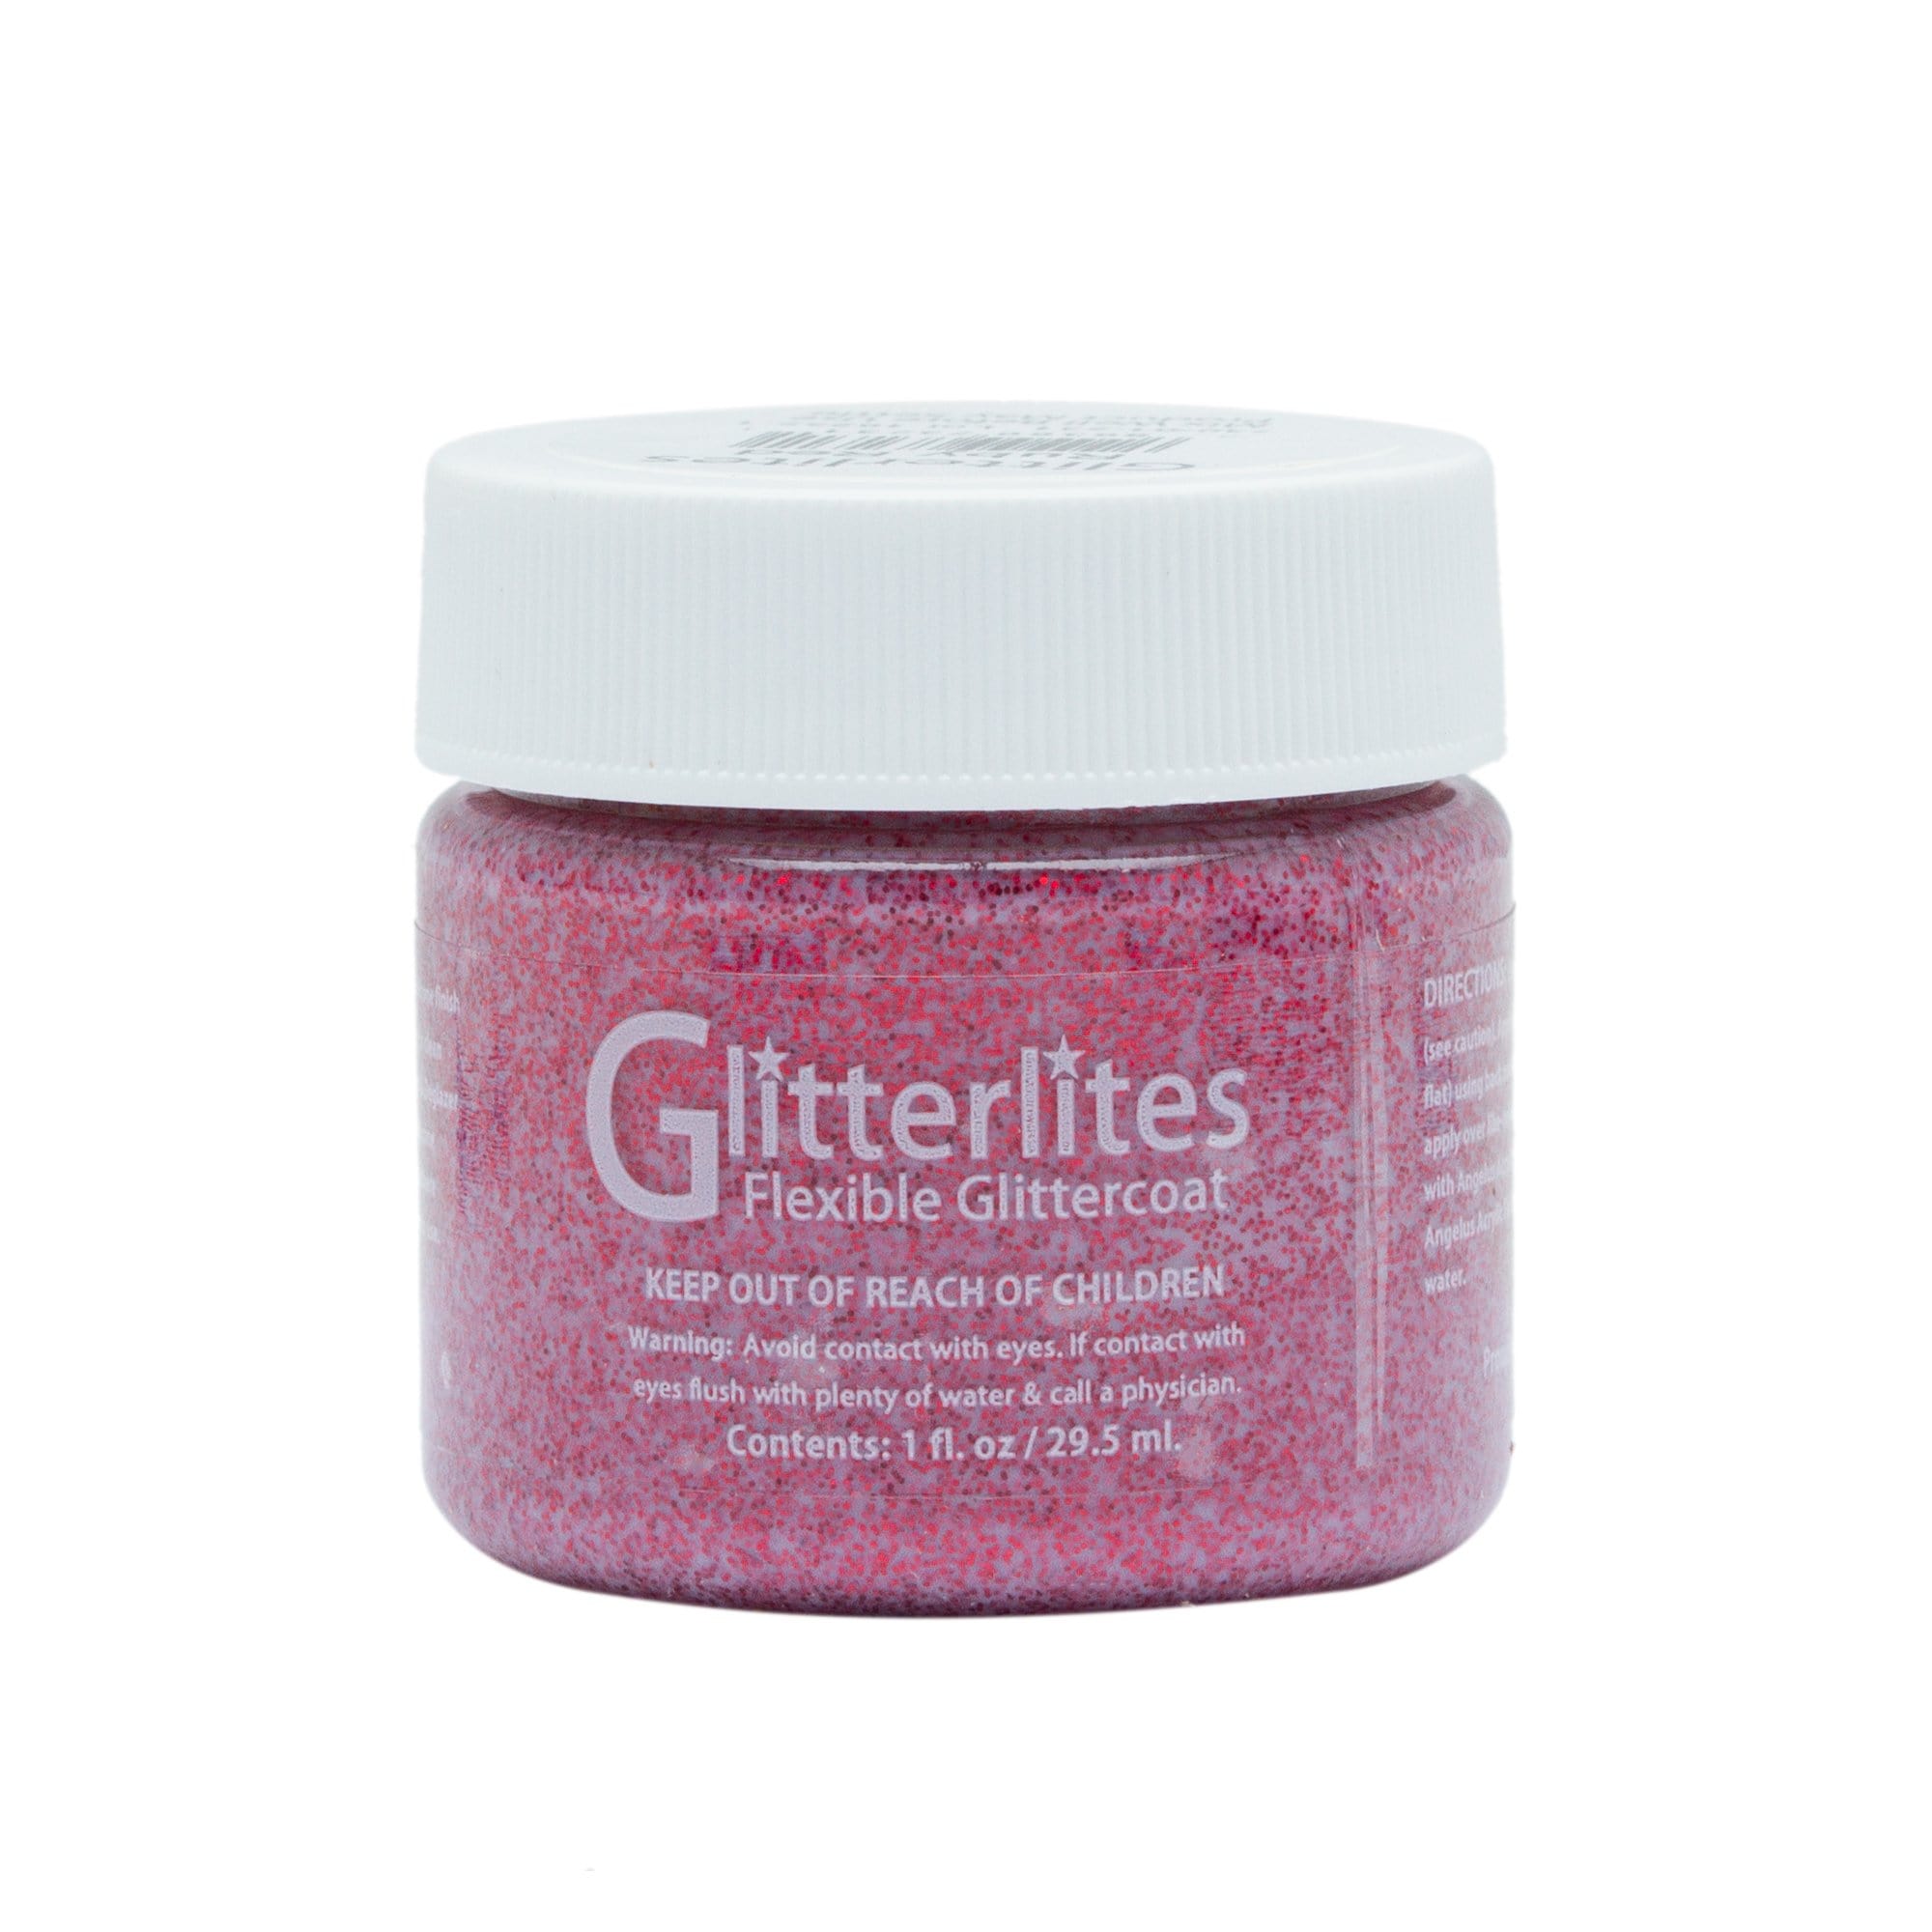 Come Halloween, get our Ruby Red Angelus Glitterlite before the Wicked Witch gets it.